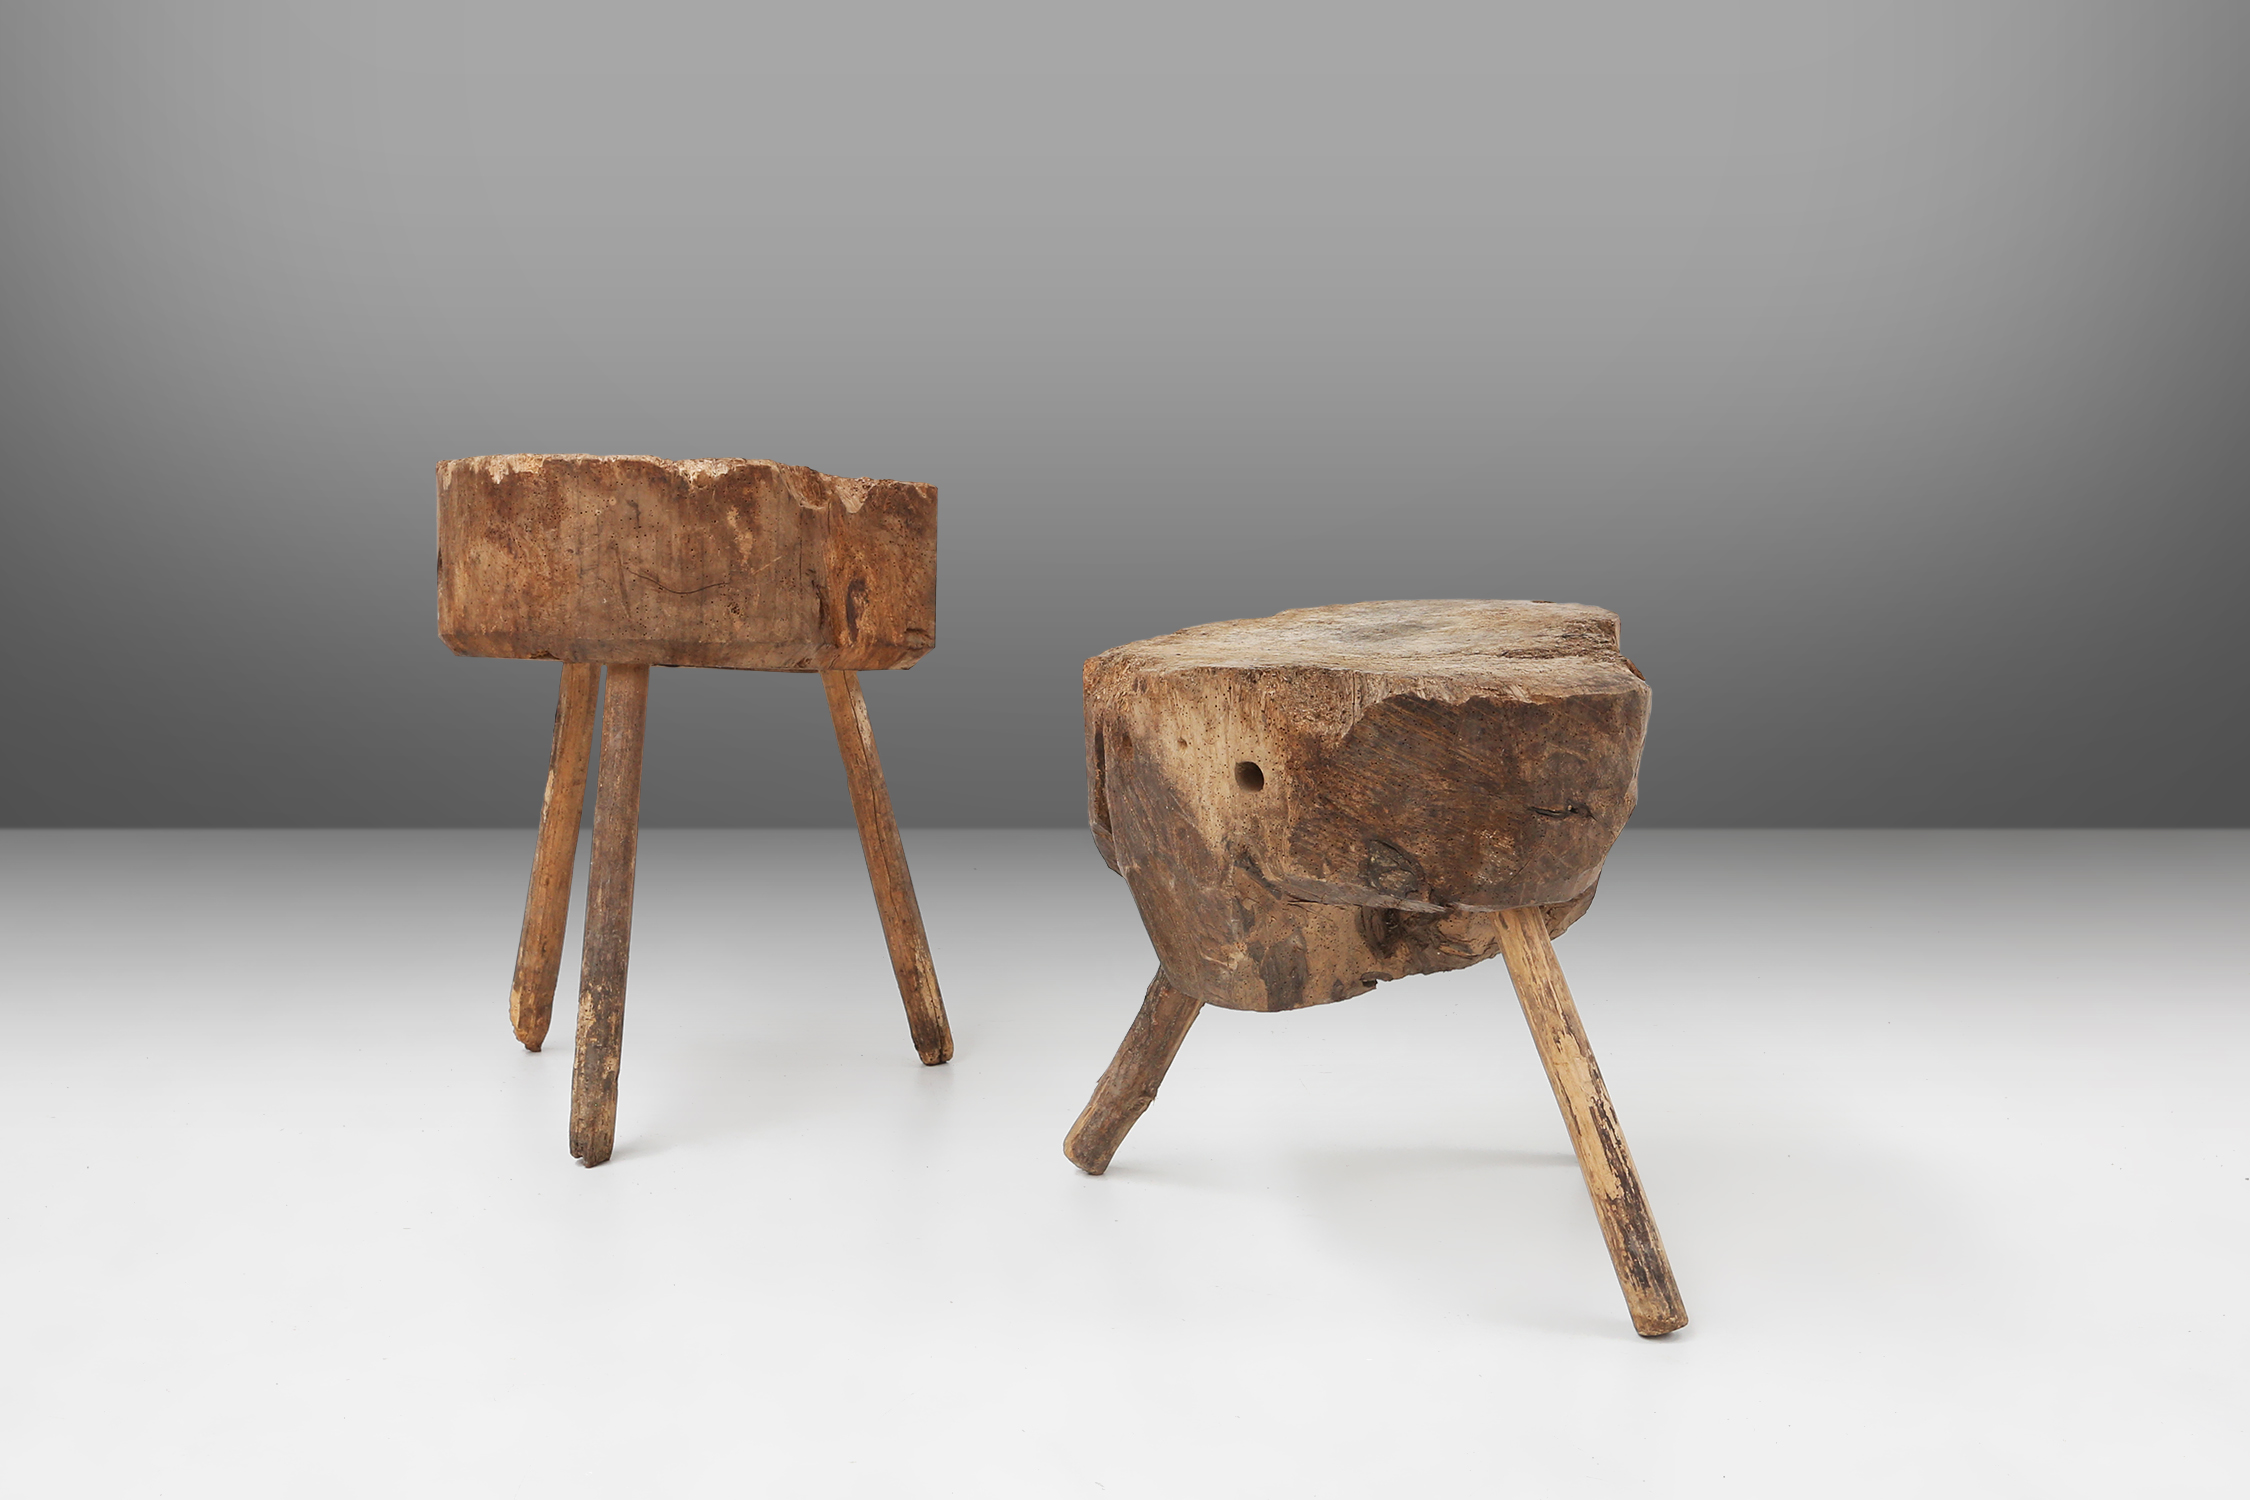 Chopping block or side table in full wood, France, ca. 1850thumbnail